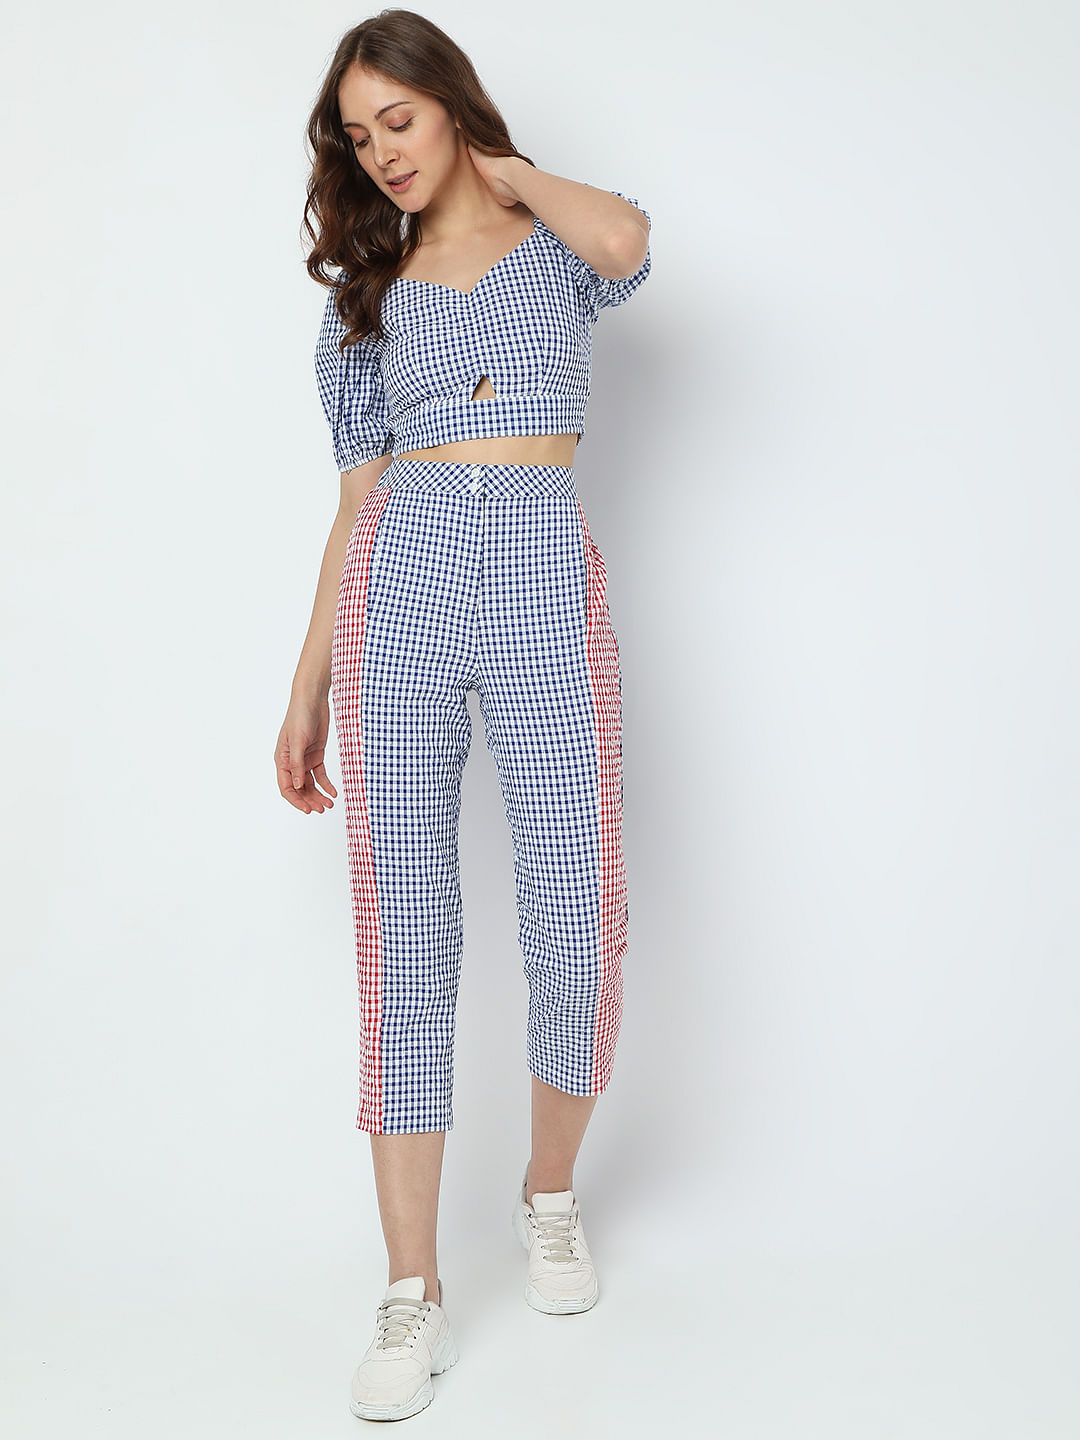 Buy Plaided Trousers online India  Women  FASHIOLAin